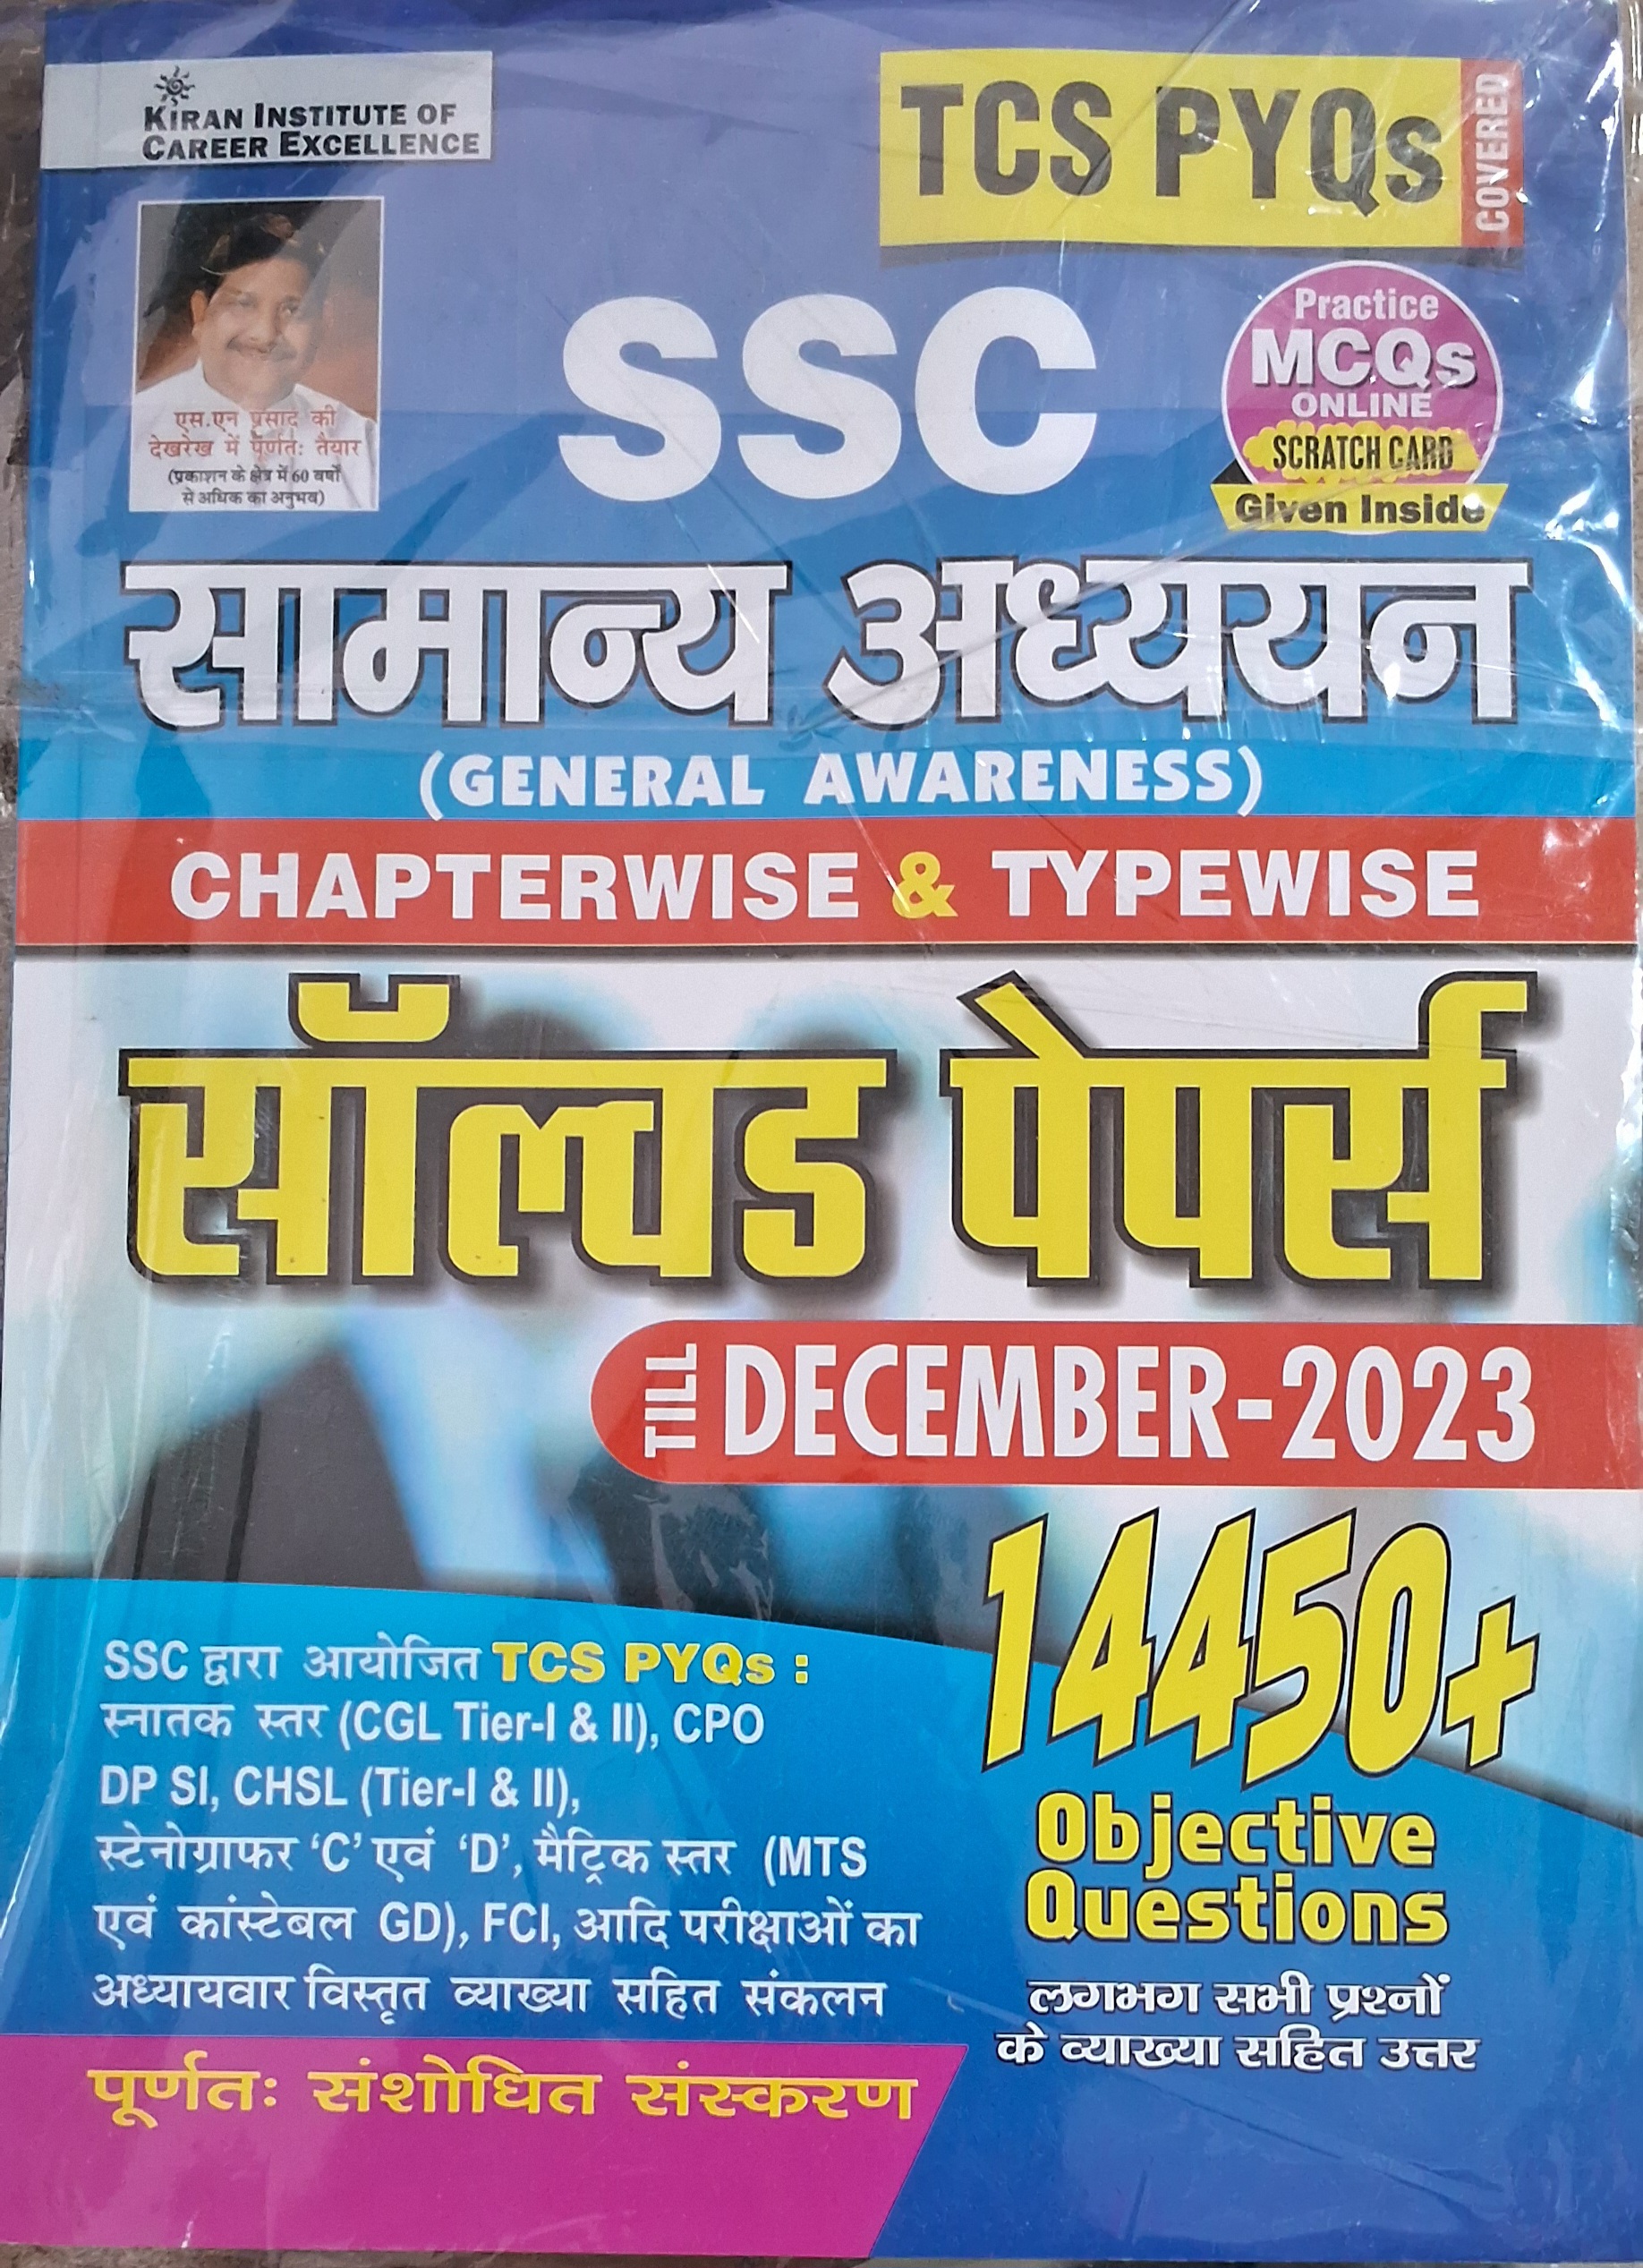 Ssc General Awareness Chapters & Typewise Solved Papers-14450+ Objective Questions-december-2023 